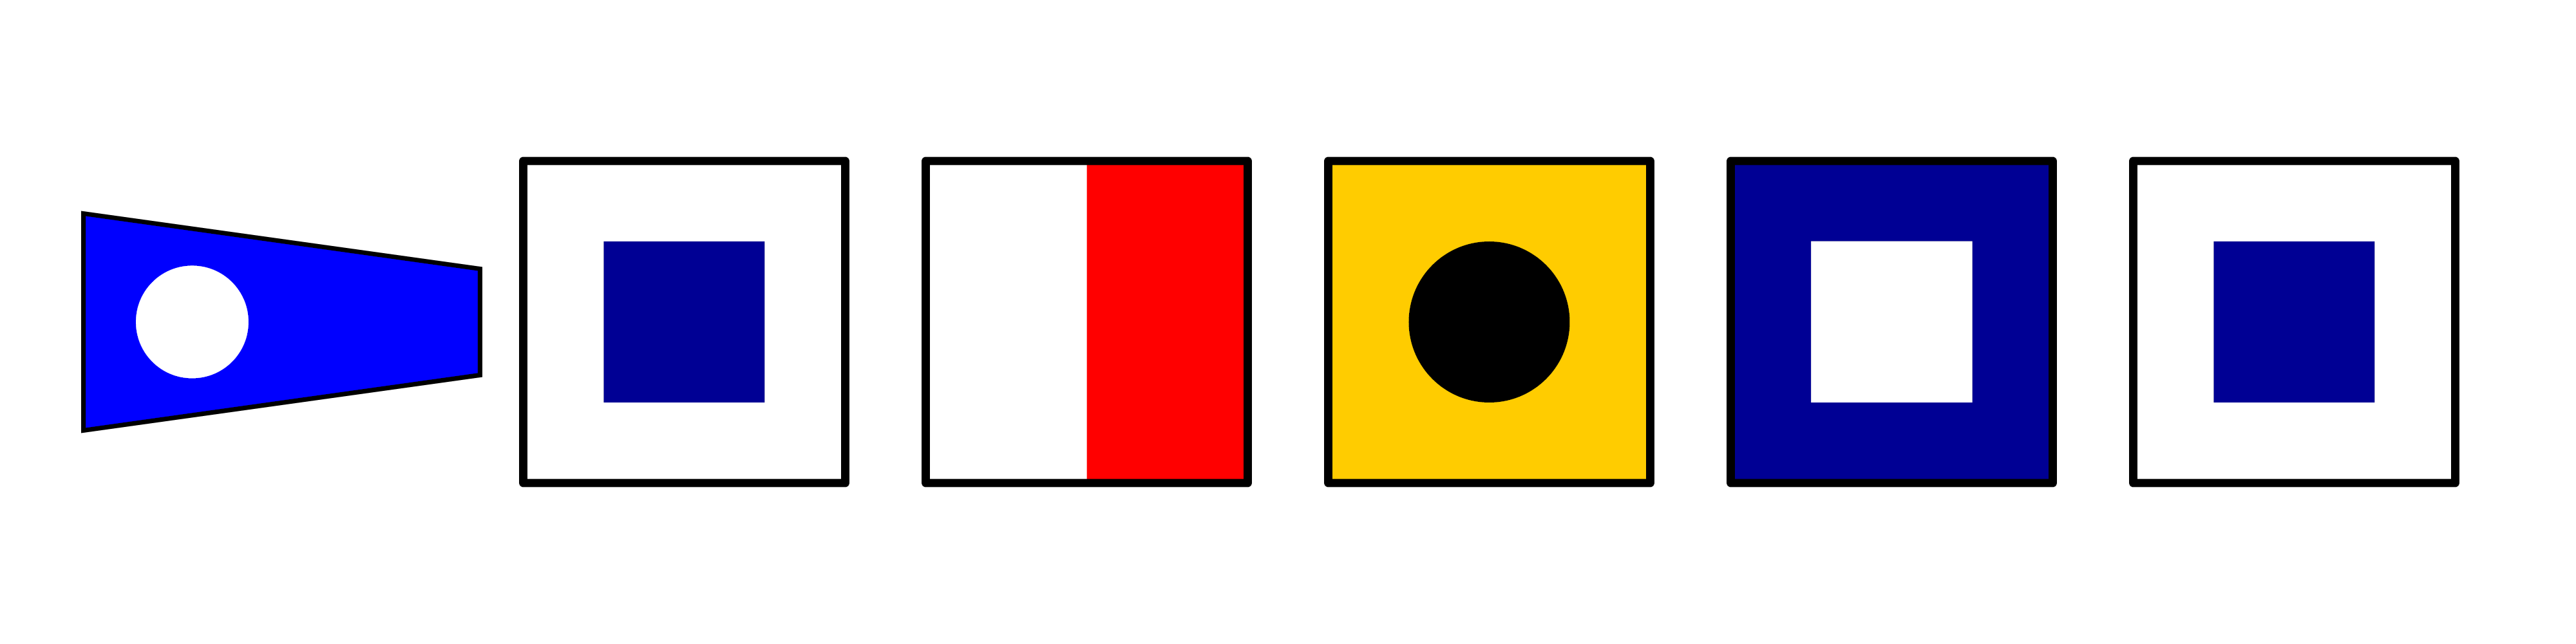 1 blue pennant with white dot. 5 square flags follow: 1 and 5 white with blue square, 2 left white right red, 3 yellow with black dot, 4 blue with white square